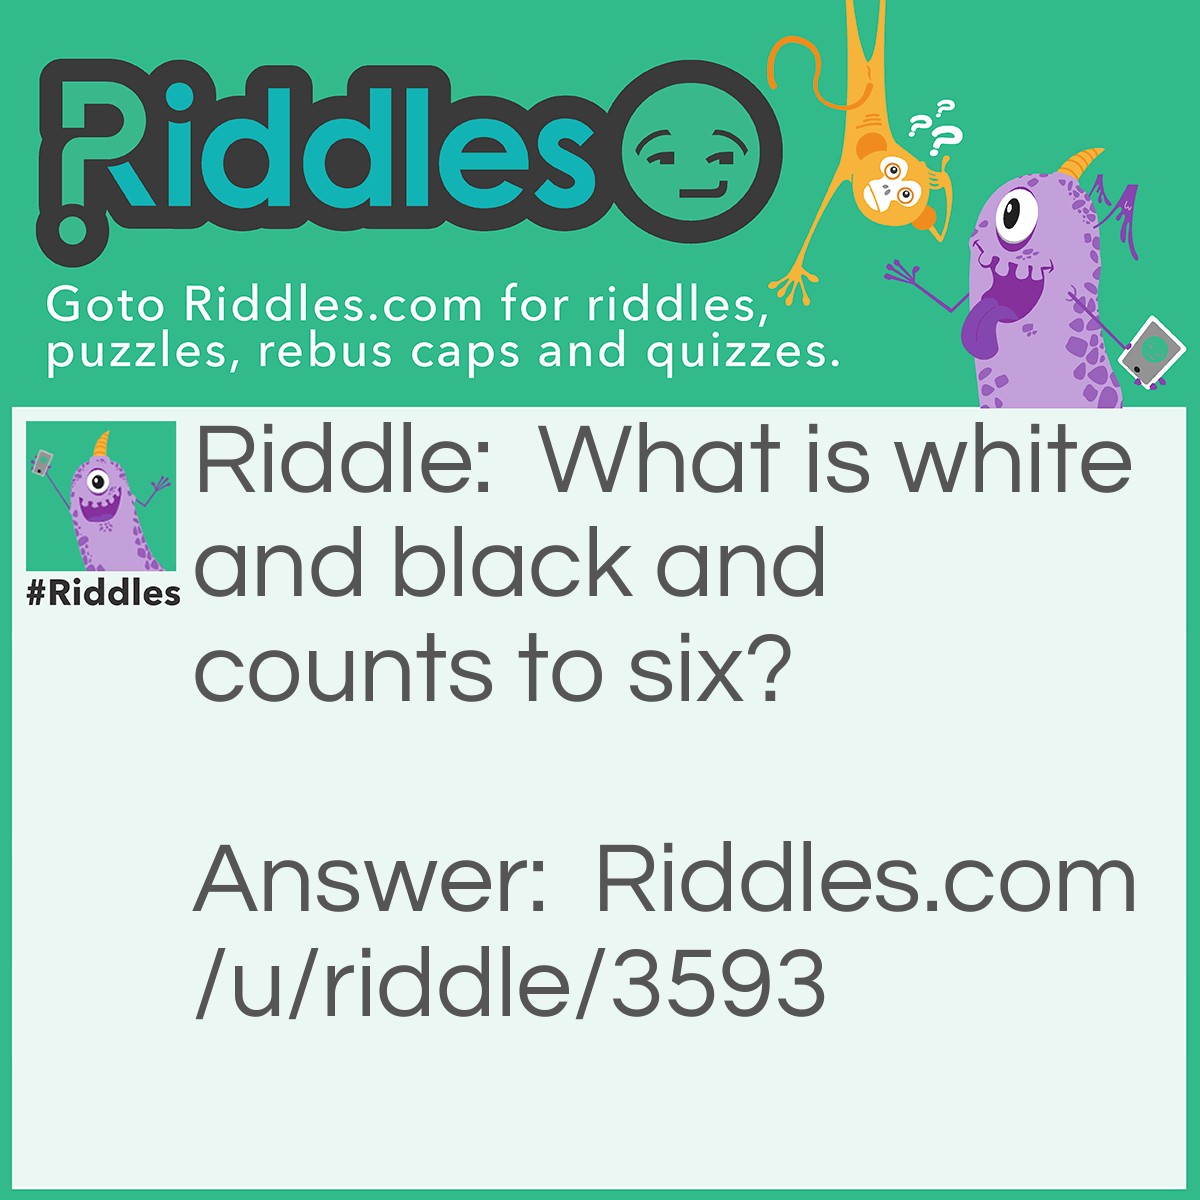 Riddle: What is white and black and counts to six? Answer: Dice.